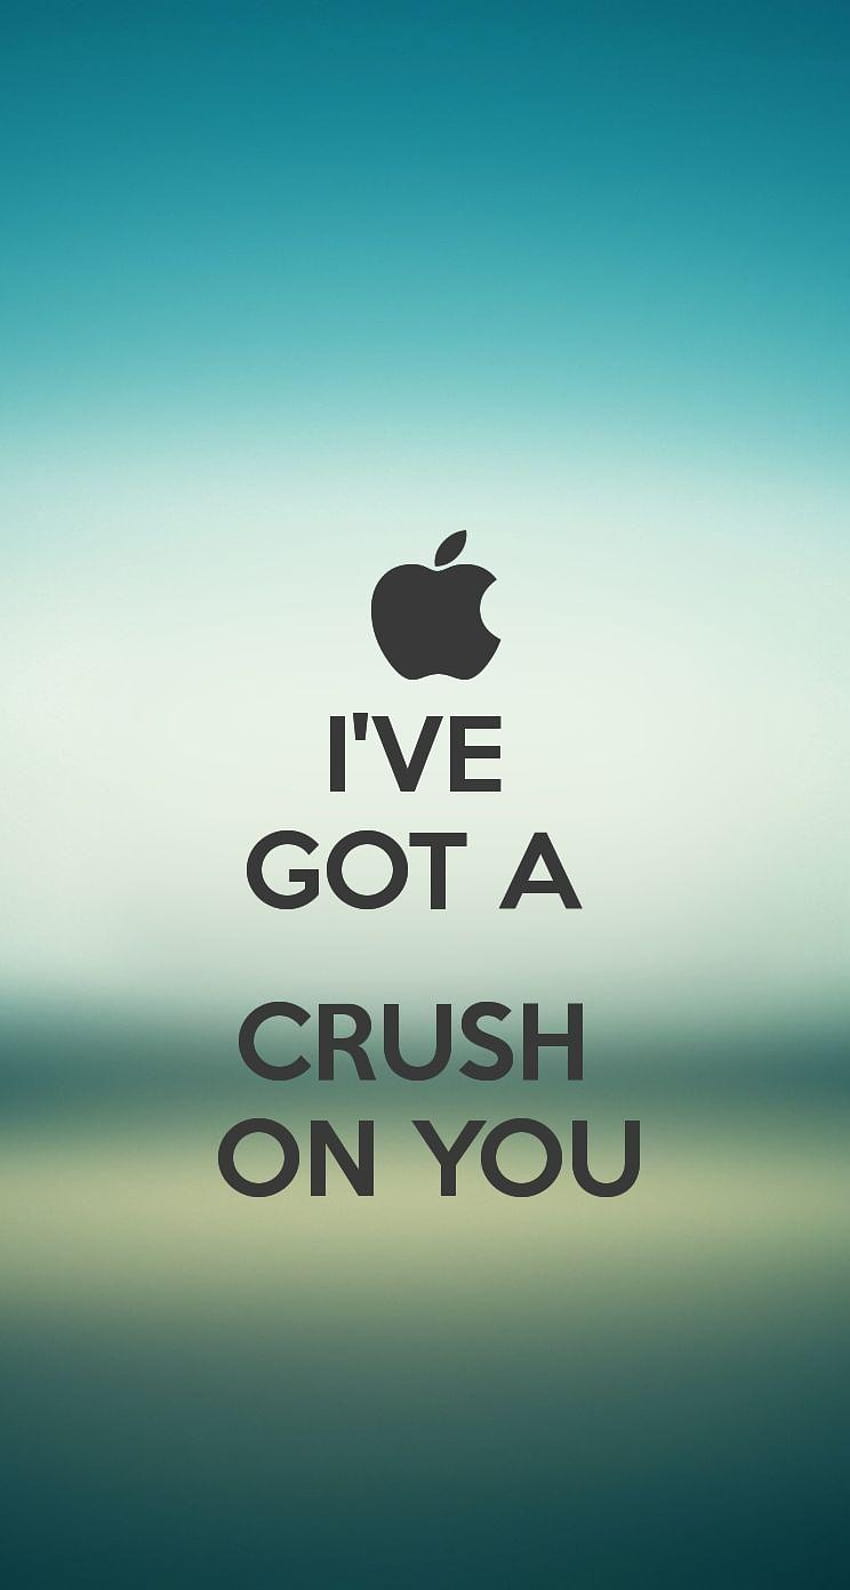 The I'VE GOT A CRUSH ON YOU I just made, ive got a crush HD phone wallpaper